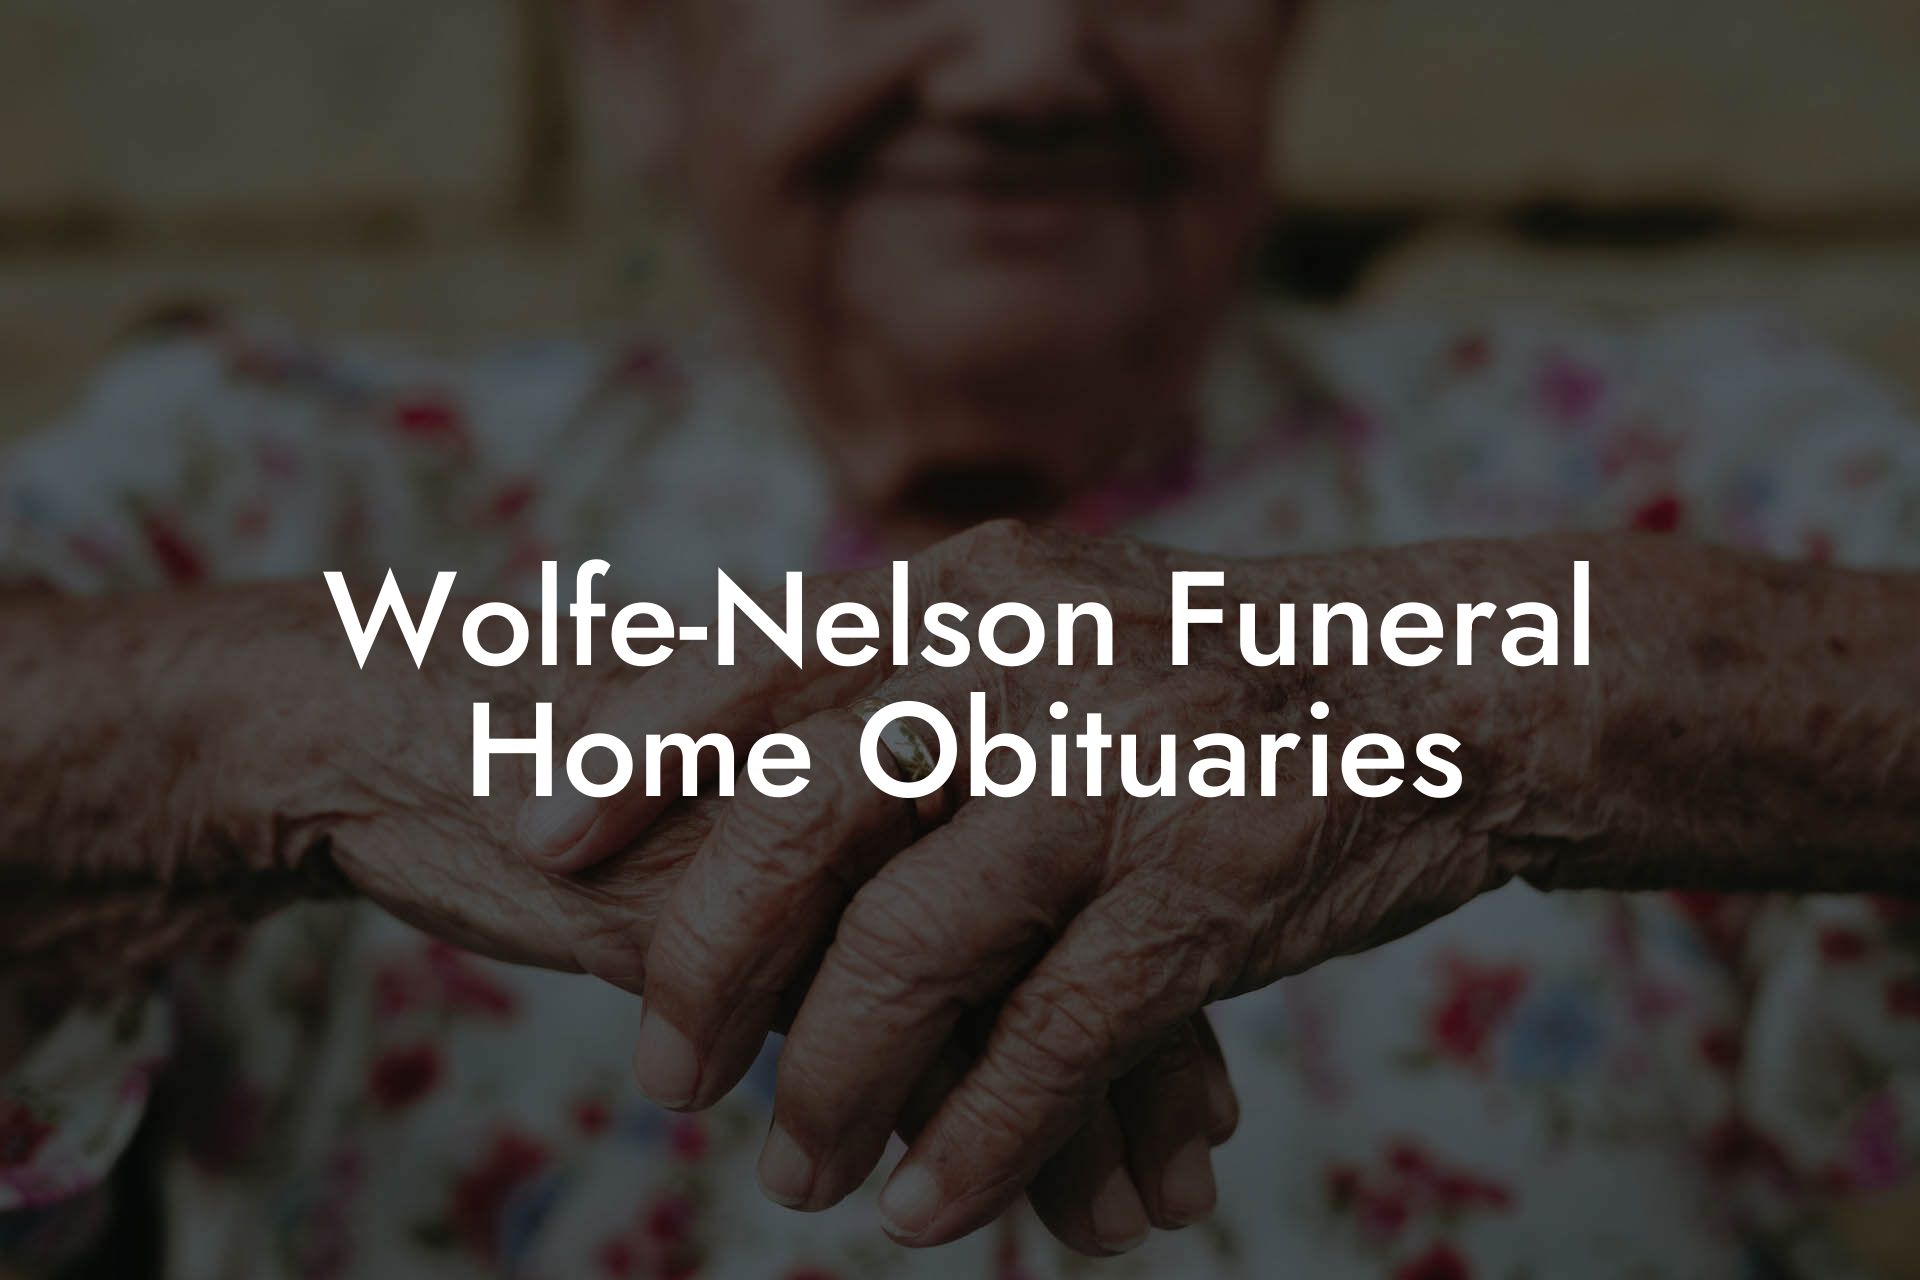 Wolfe-Nelson Funeral Home Obituaries